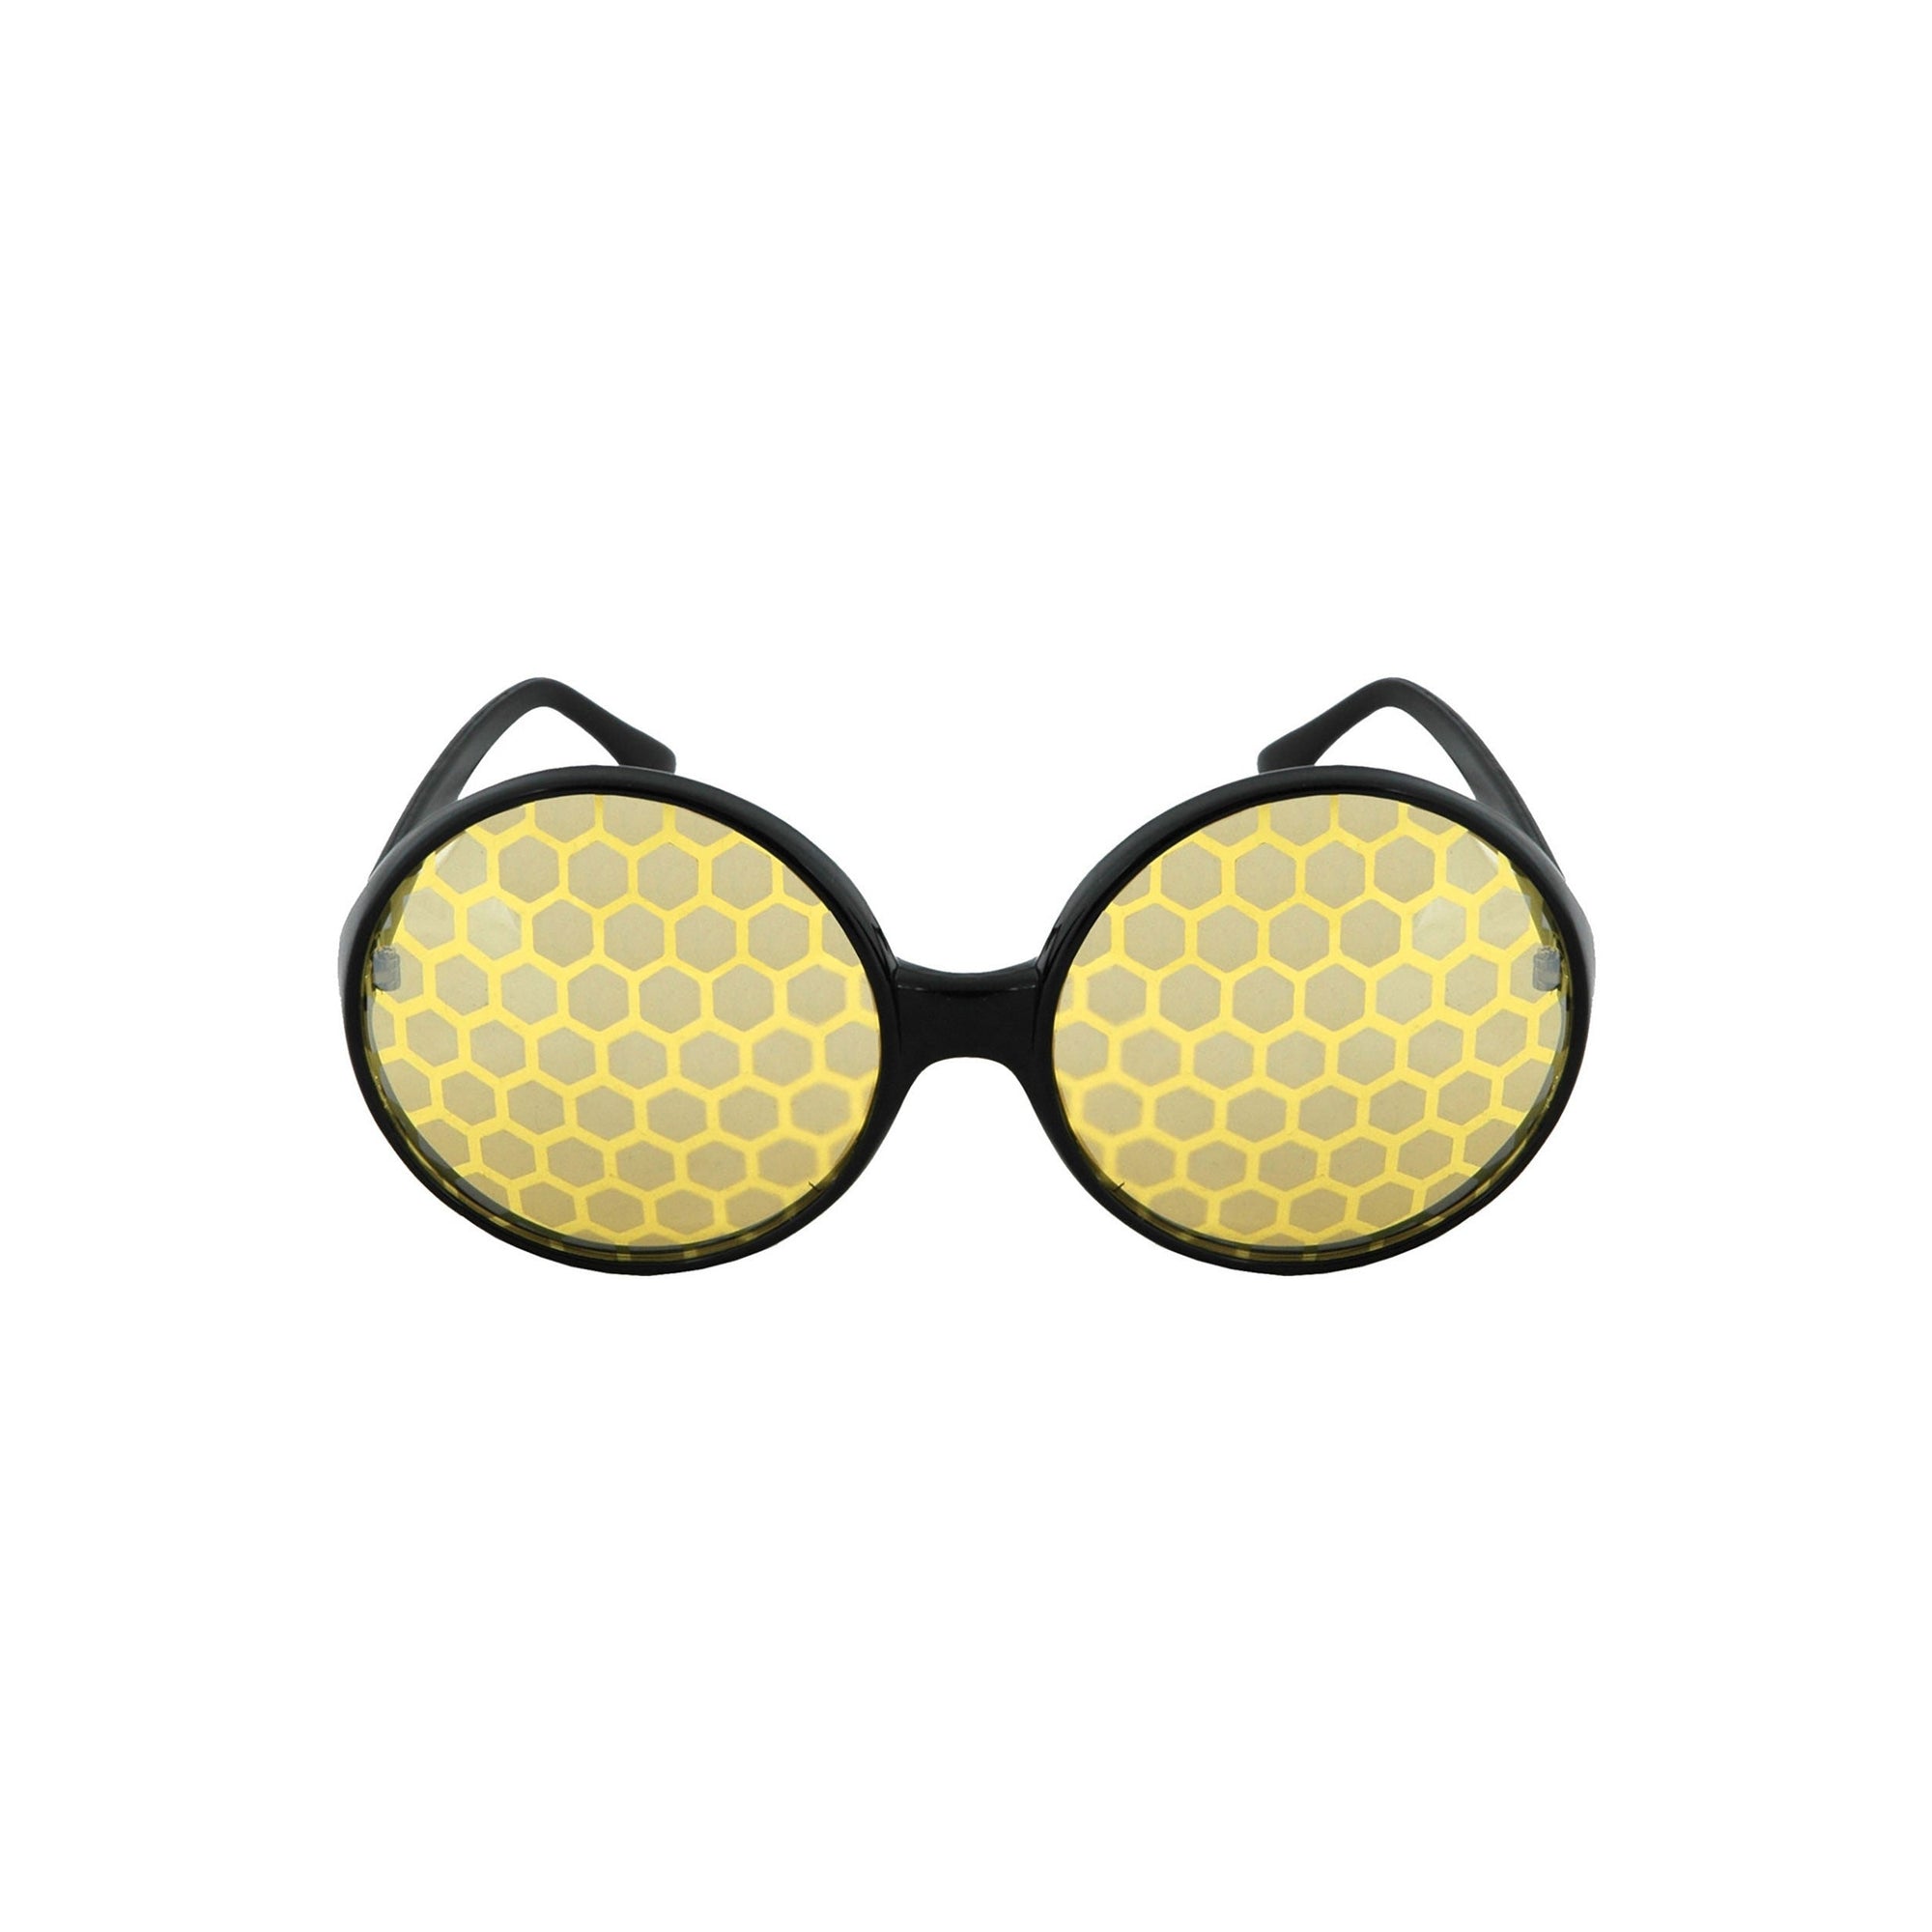 Black & Yellow Bug Eyes Glasses-Dress-Up-Elope-Yellow Springs Toy Company